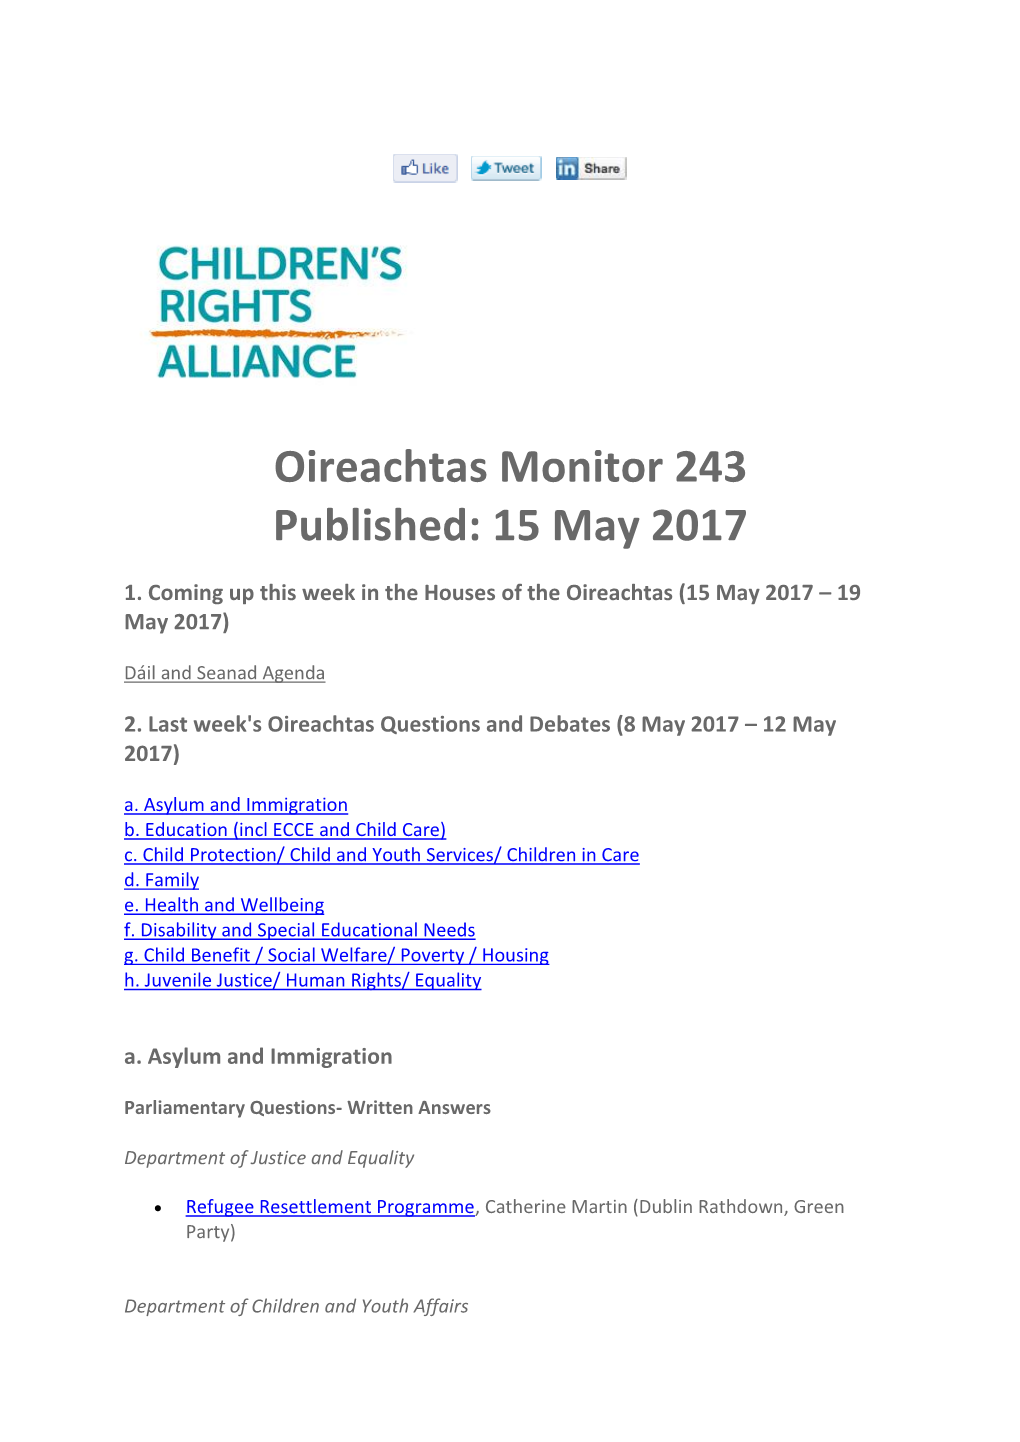 Oireachtas Monitor 243 Published: 15 May 2017